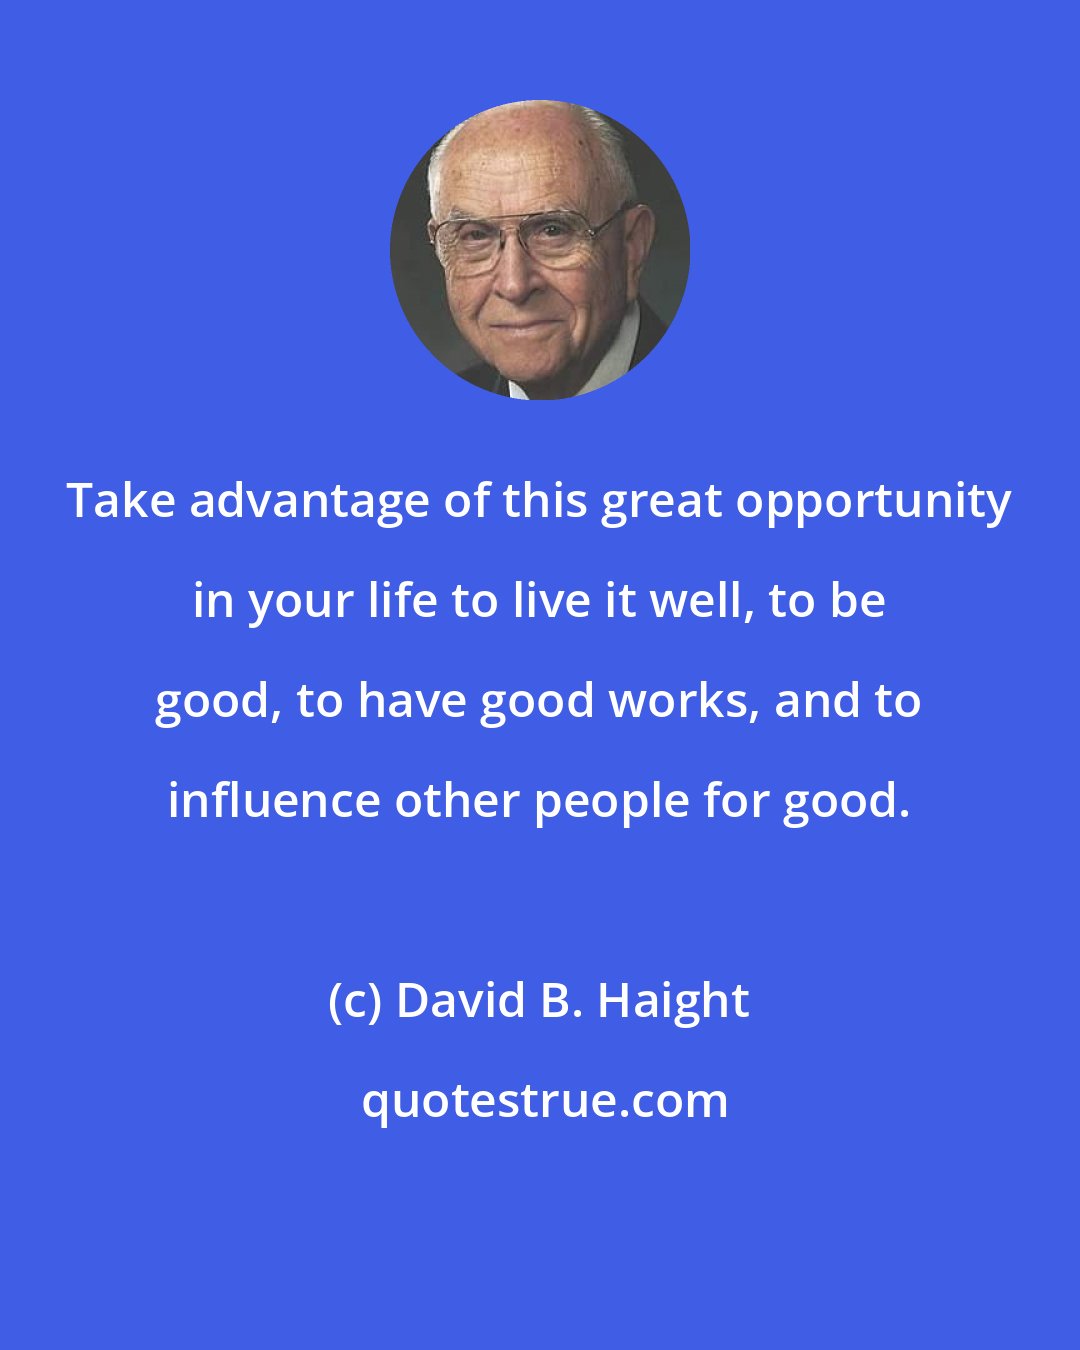 David B. Haight: Take advantage of this great opportunity in your life to live it well, to be good, to have good works, and to influence other people for good.